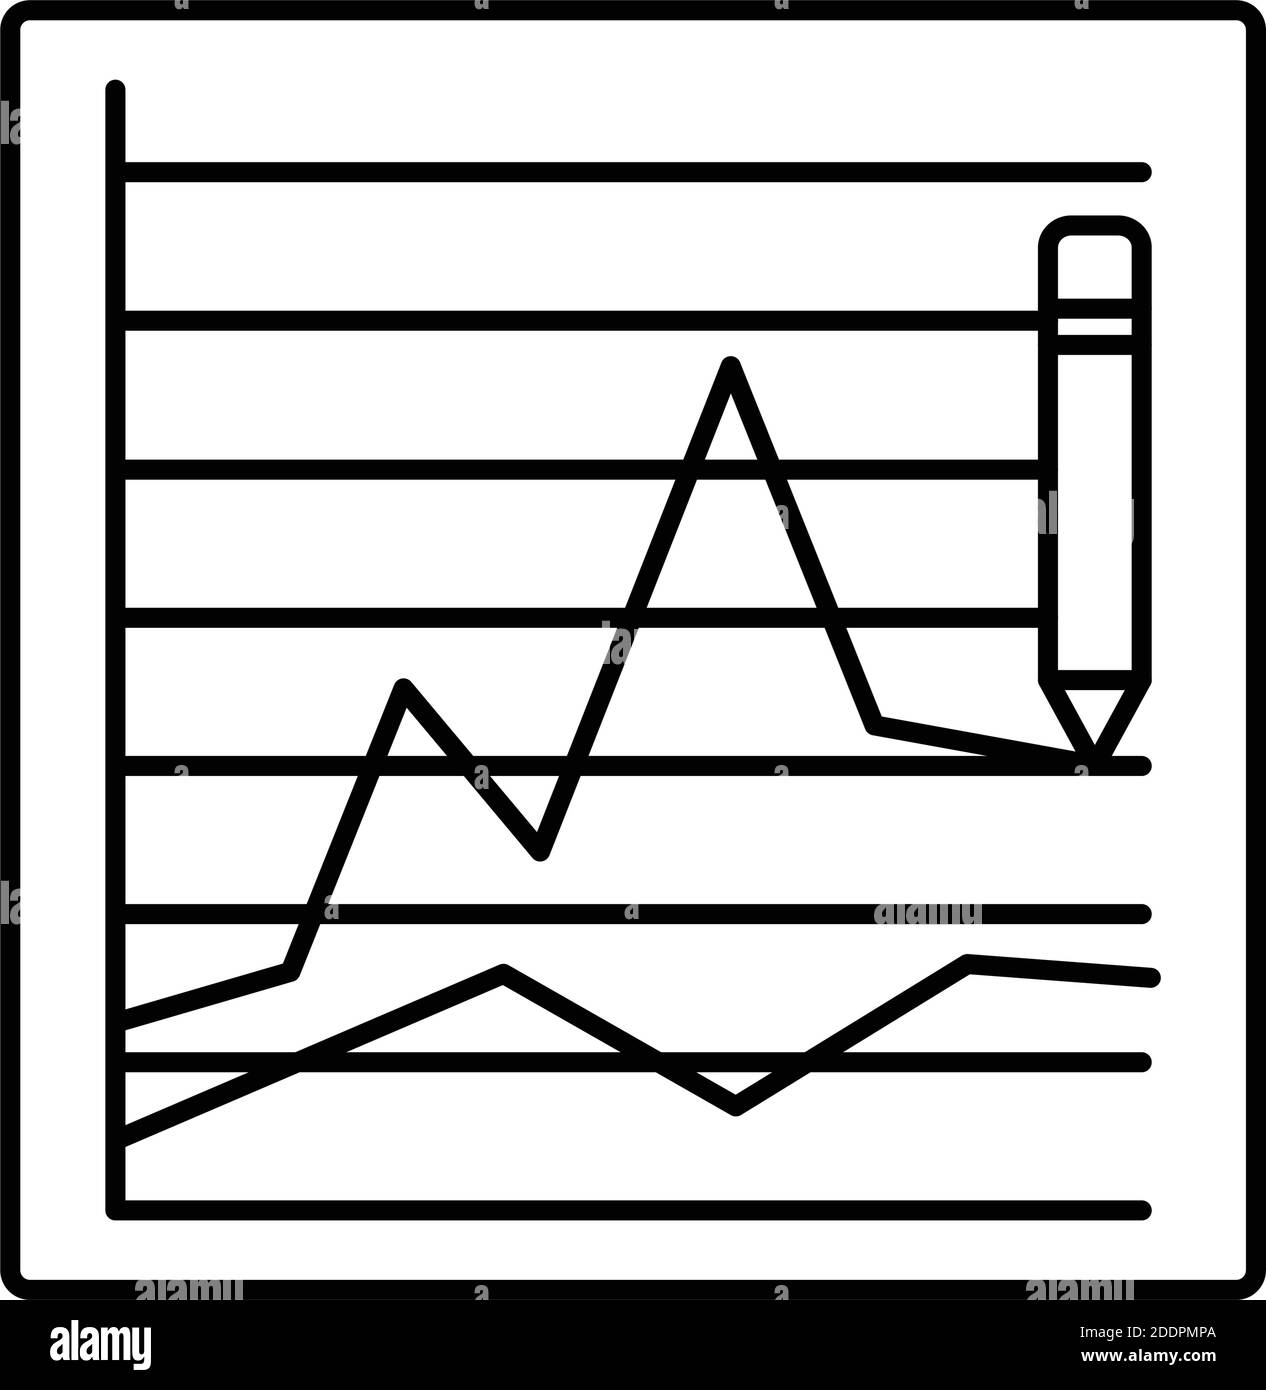 Graphing Isolated Vector icon that can be easily modified or edited Stock Vector